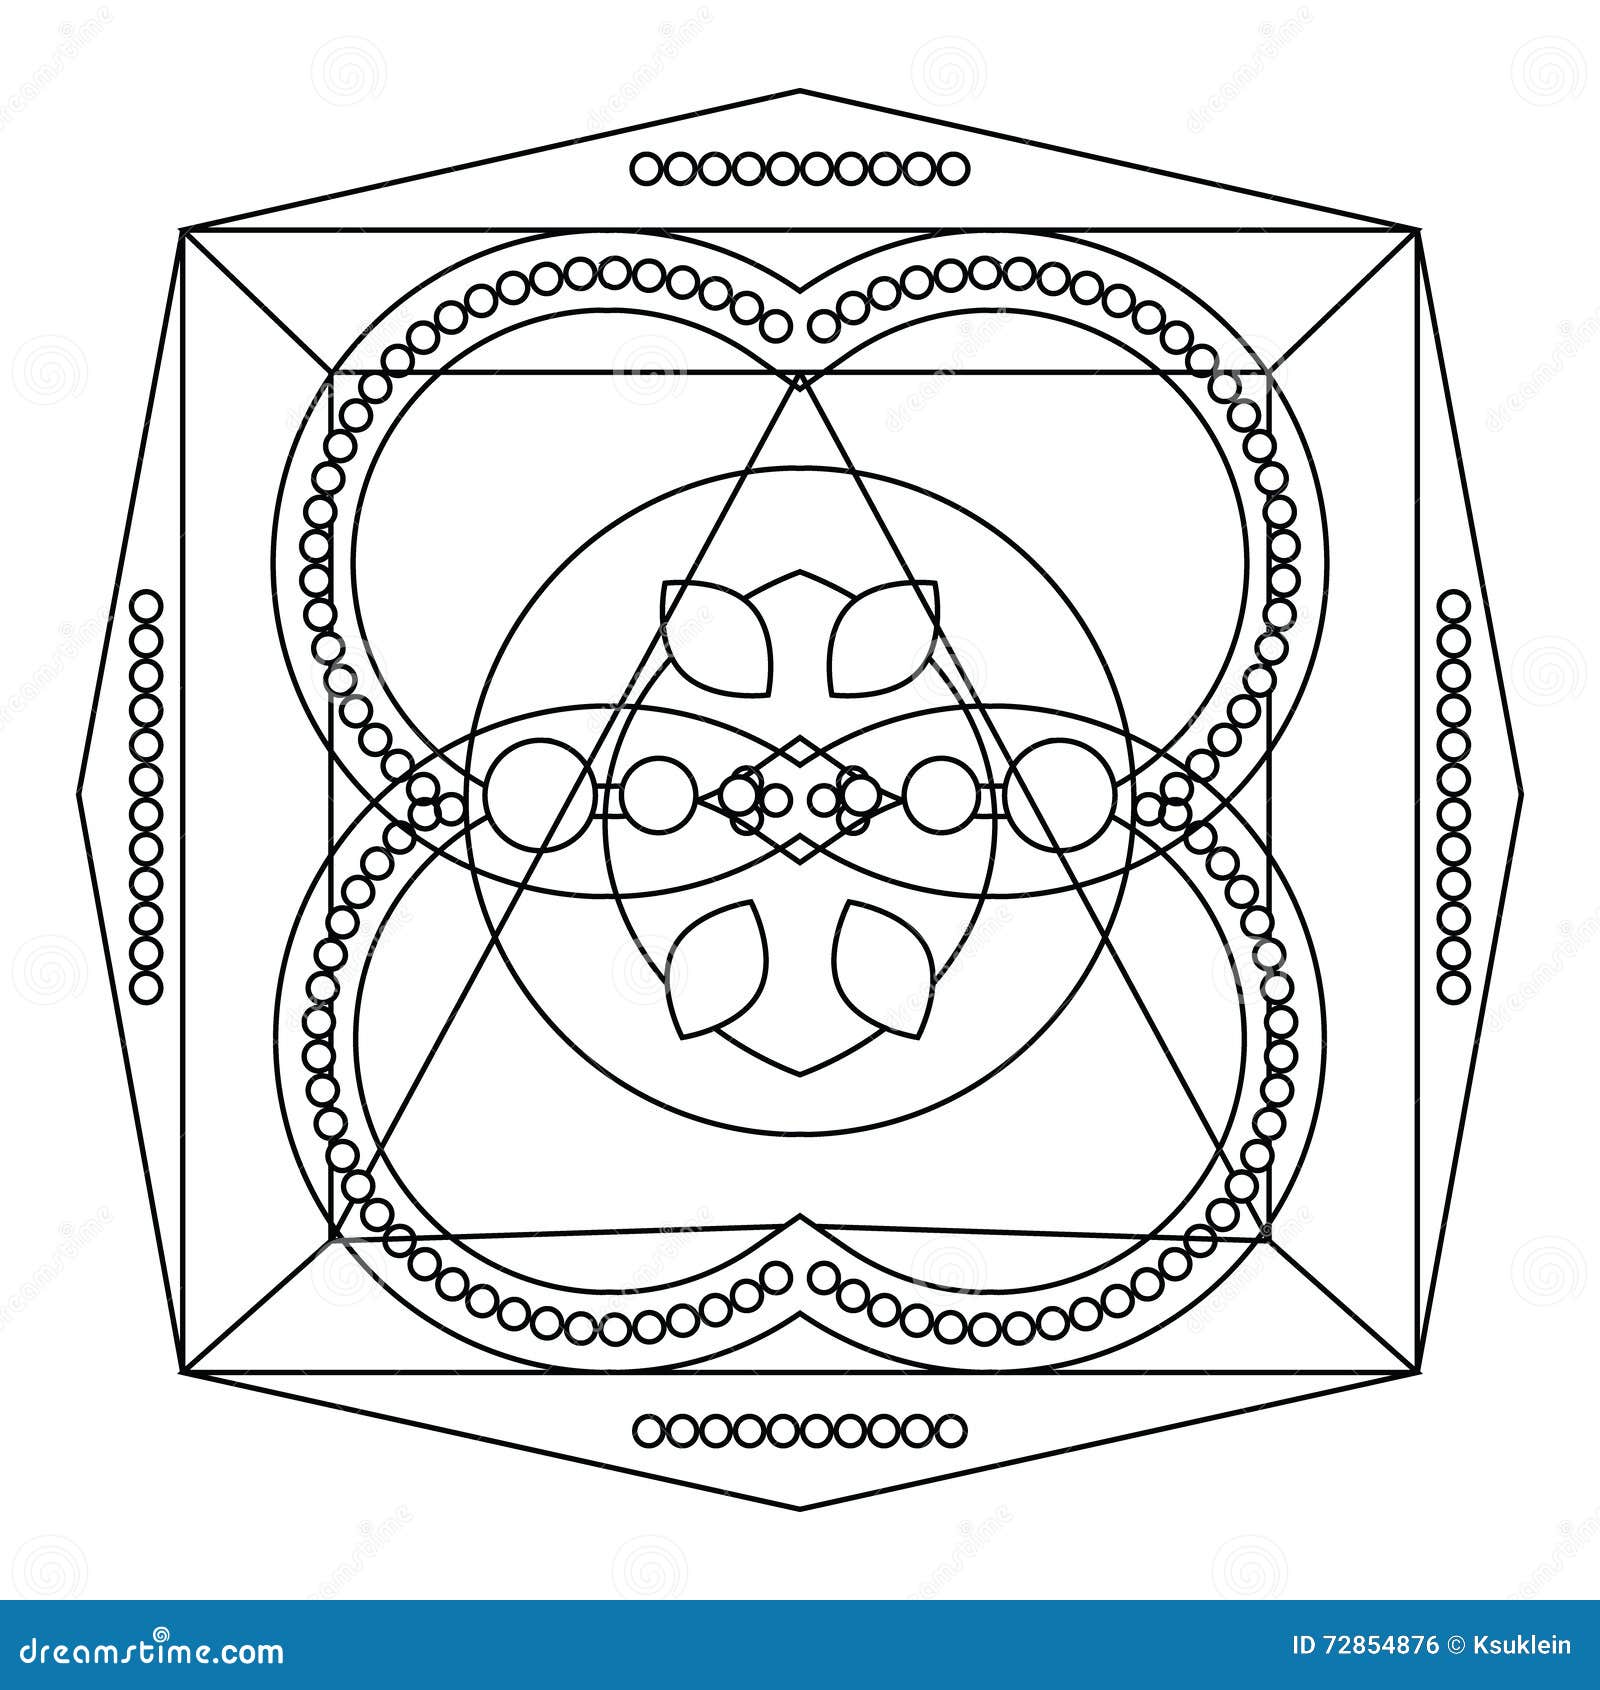 Relaxing coloring page with mandala for kids and adults art therapy meditation coloring book Fantasy graphic